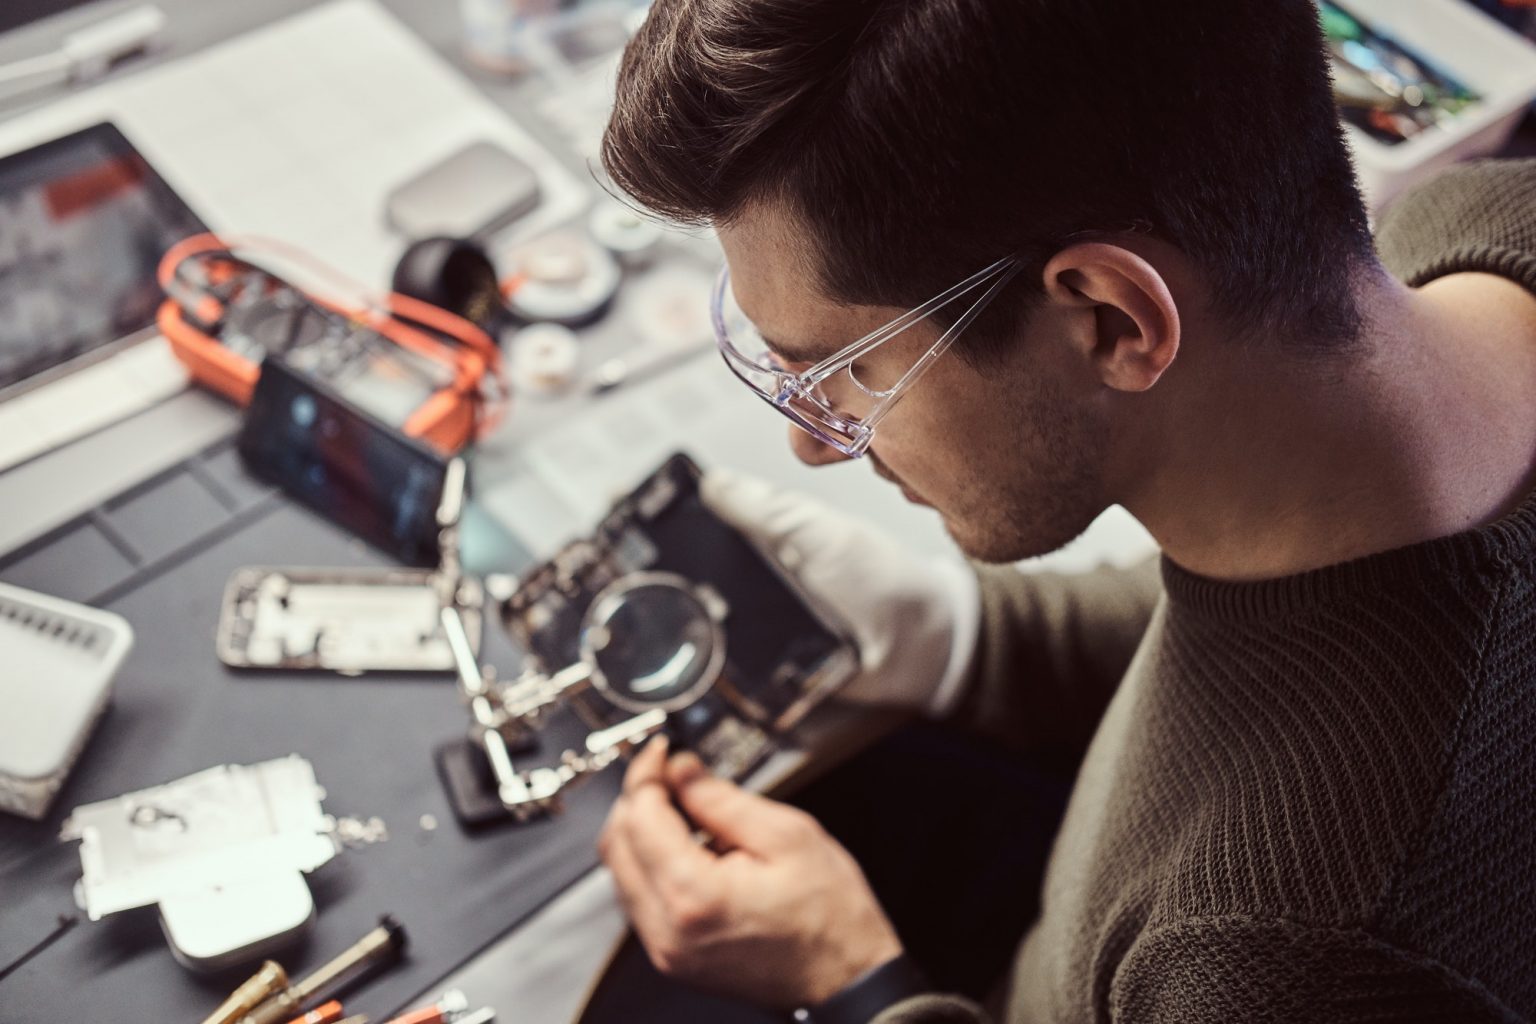 The technician repairing a damaged smartphone in the electronic workshop.